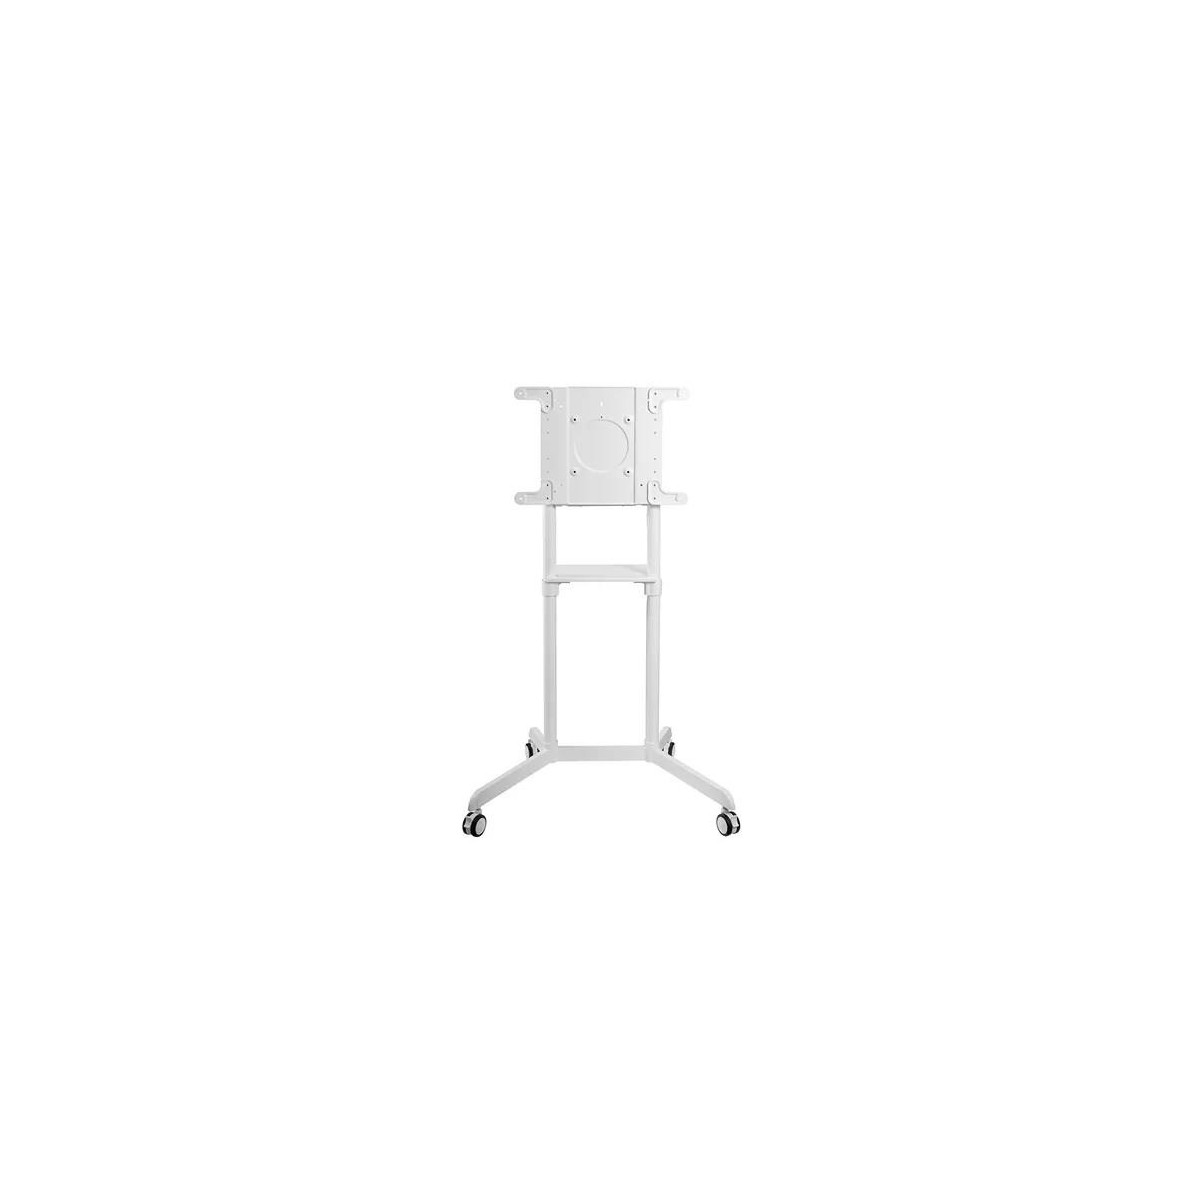 32-70 inch - Mobile Flat Screen Floor Stand (stand+trolley) (height: 160 cm) White